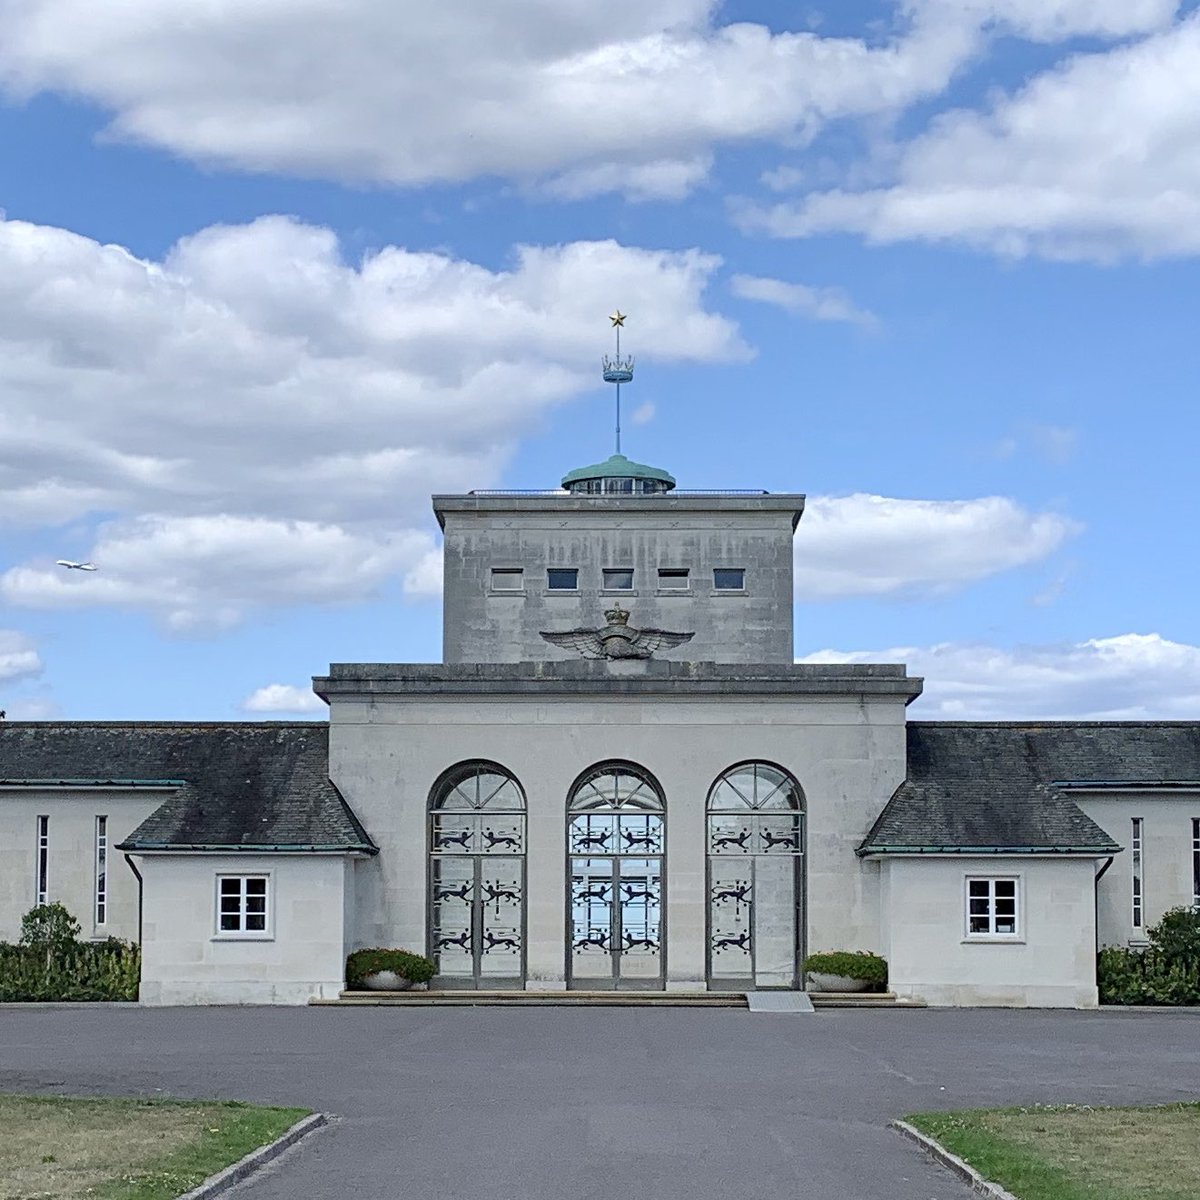 This is the  @CWGC Air Forces Memorial on top of Cooper’s Hill. It overlooks Runnymede (you know, where King John was forced to seal Magna Carta) It was designed by the Commisison’s Architect, Sir Edward Maufe, and unveiled by Her Majesty, Queen Elizabeth II, in 1953